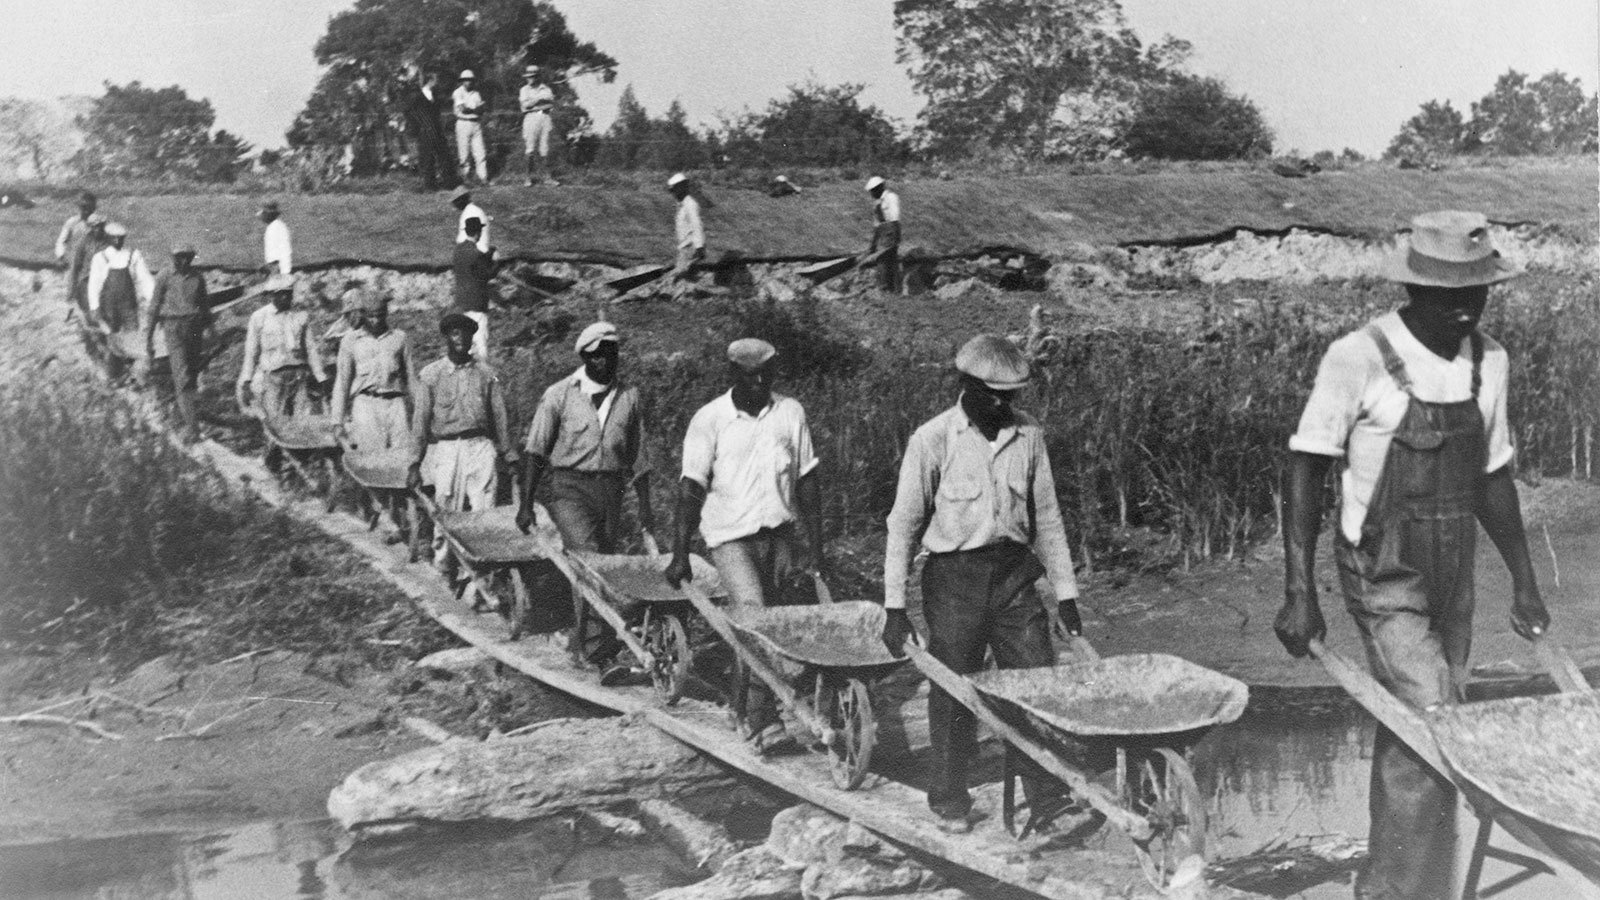 Workers build a levee in Plaquemine Parish, just south of New Orleans, Louisiana, in 1935